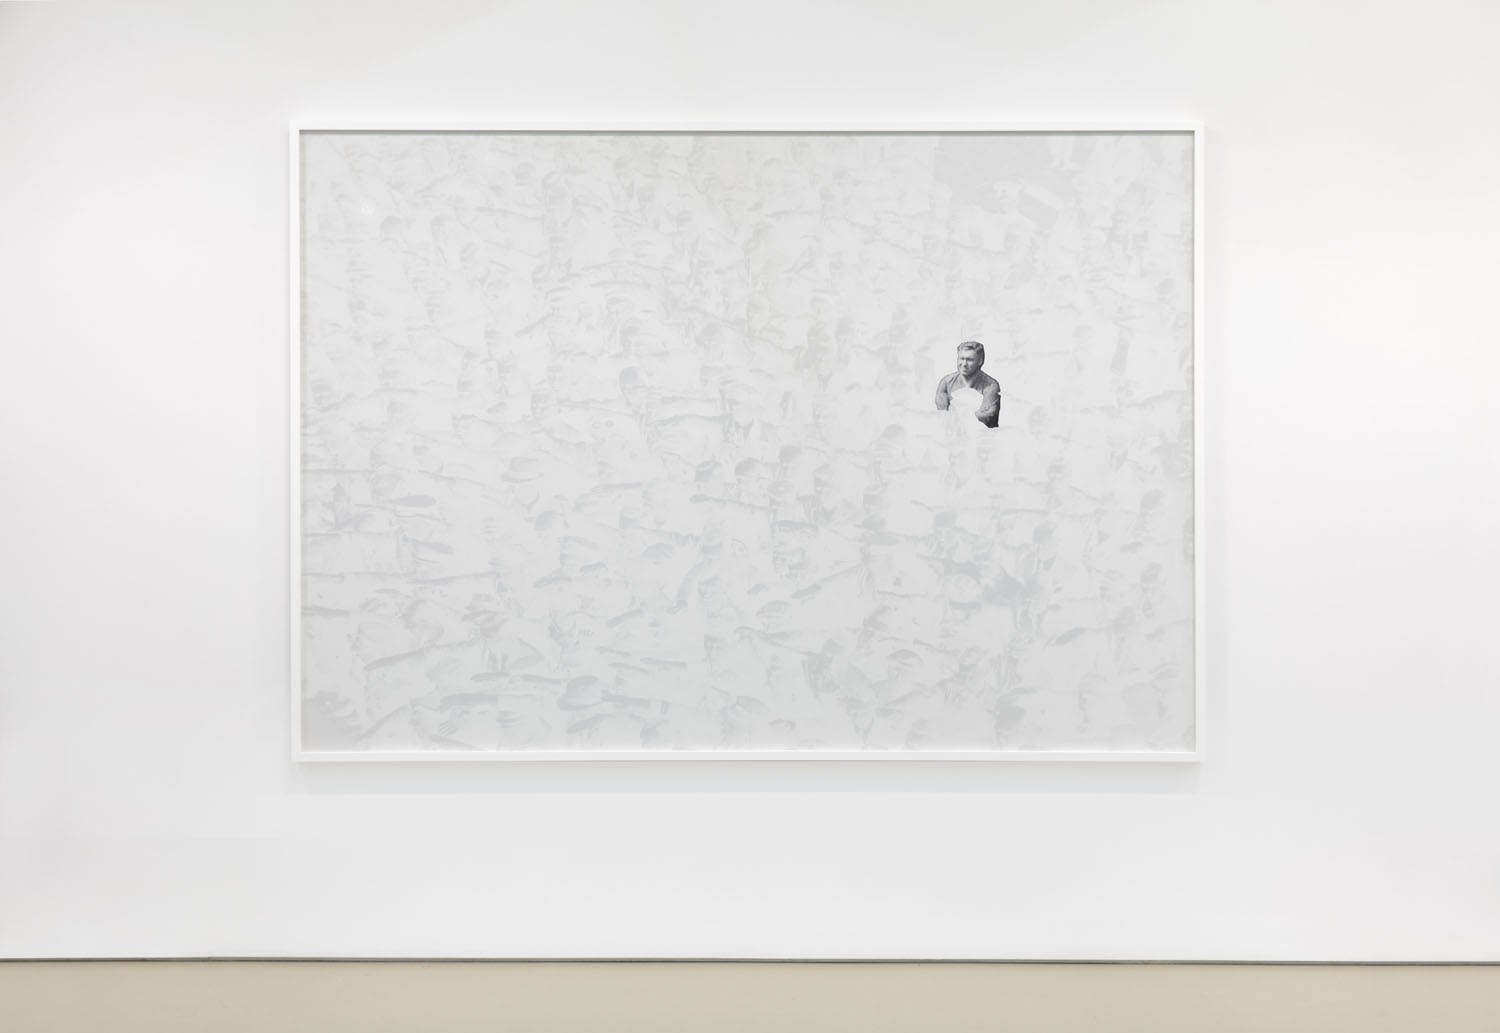 Hank Willis Thomas' Refusal, without flash, a large rectangular photograph of a lone man who appears sitting with his arms crossed